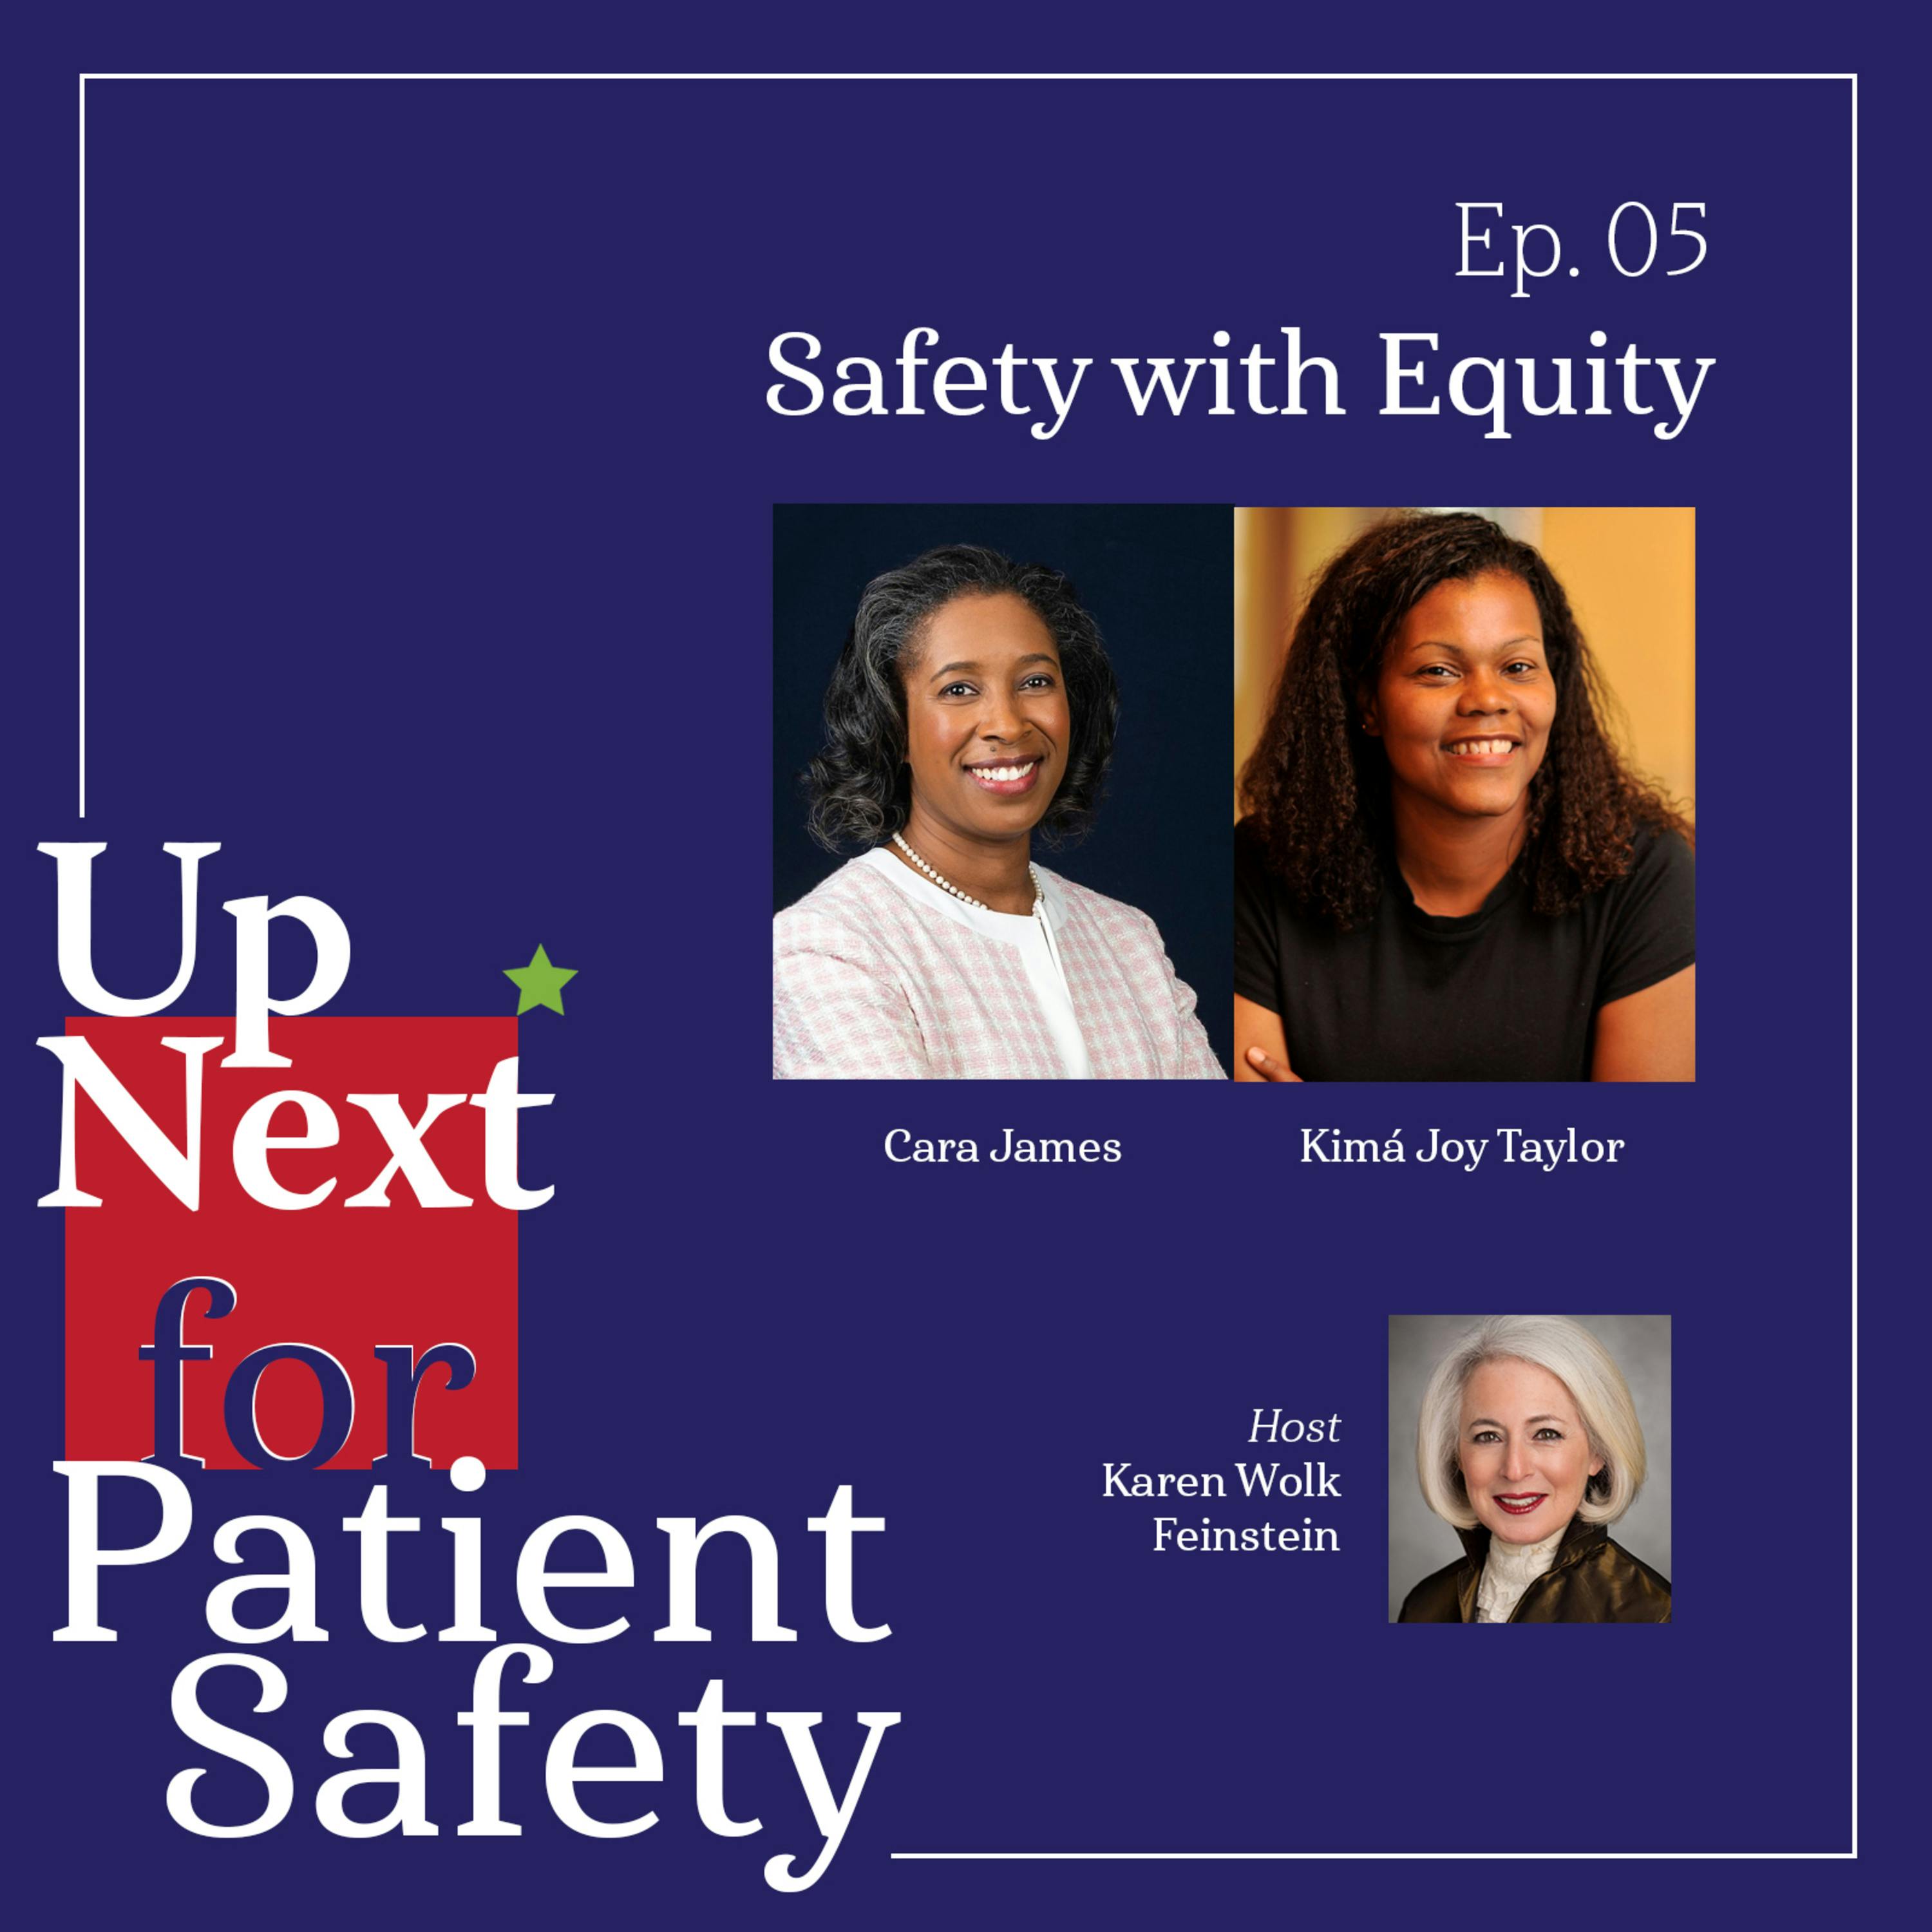 Safety with Equity